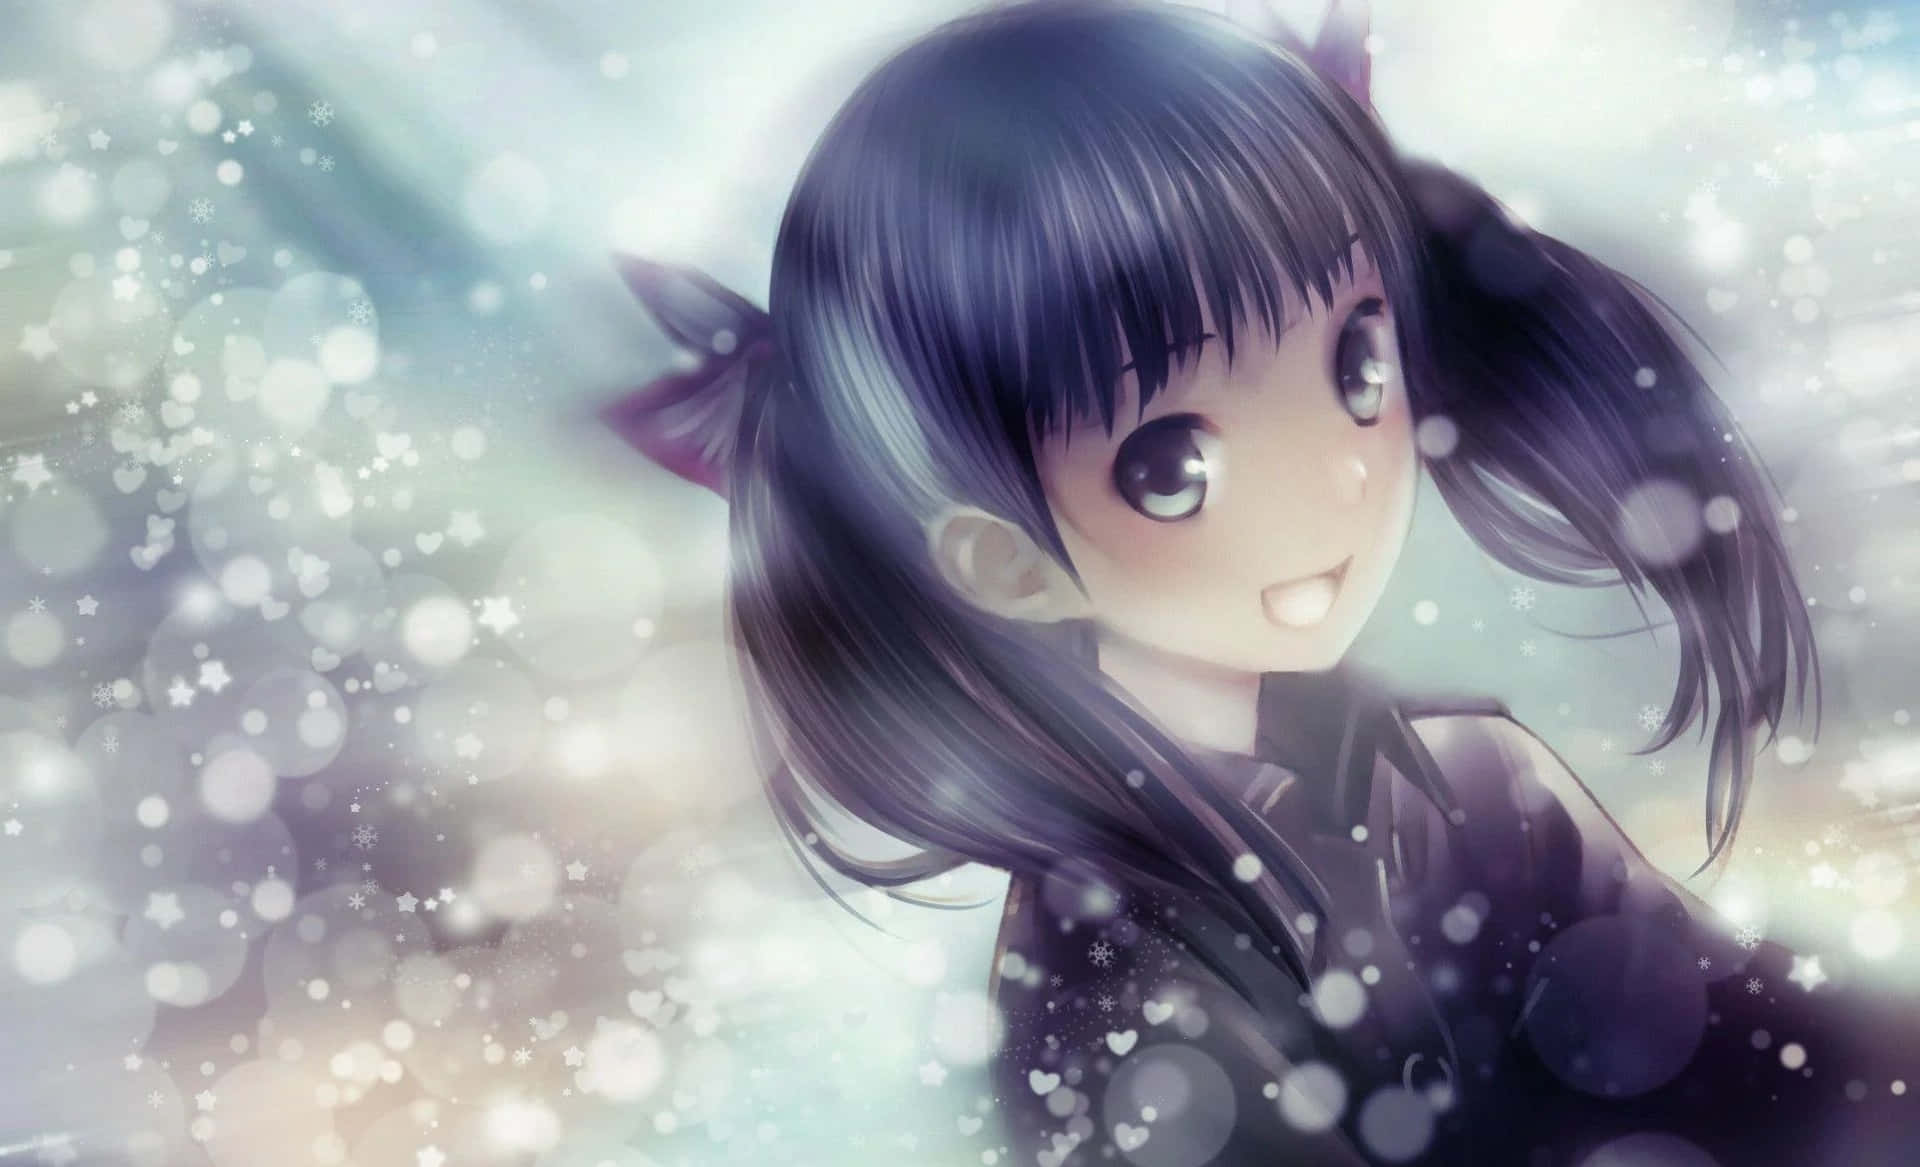 Get lost in this enchanting world of cute anime